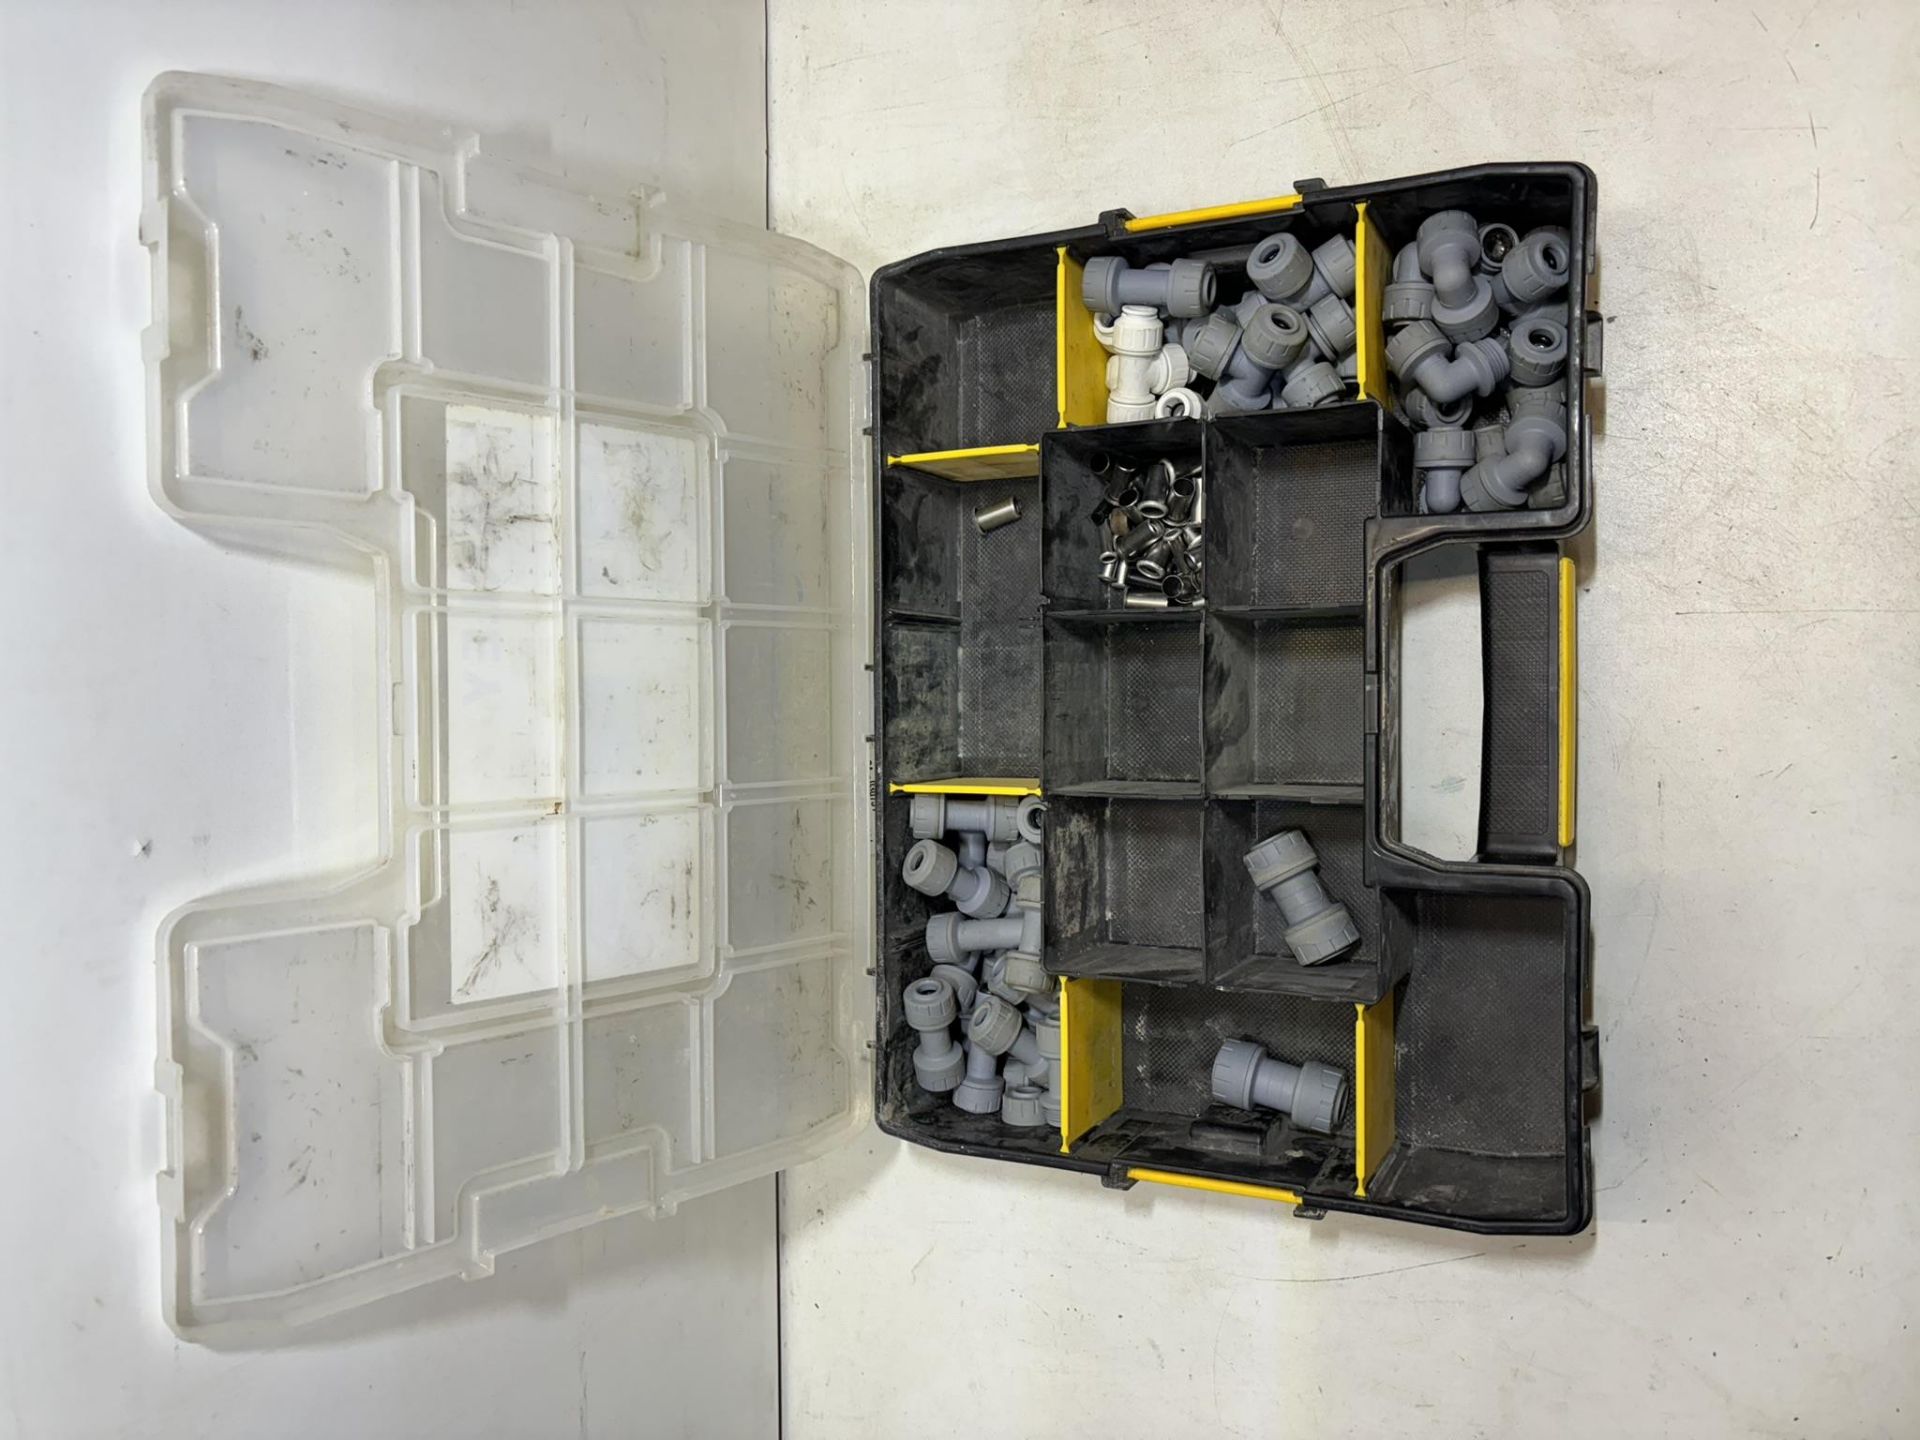 3 x Deep Compartment Organisers With Brass Pipe Fittings - See Photos - Image 7 of 7